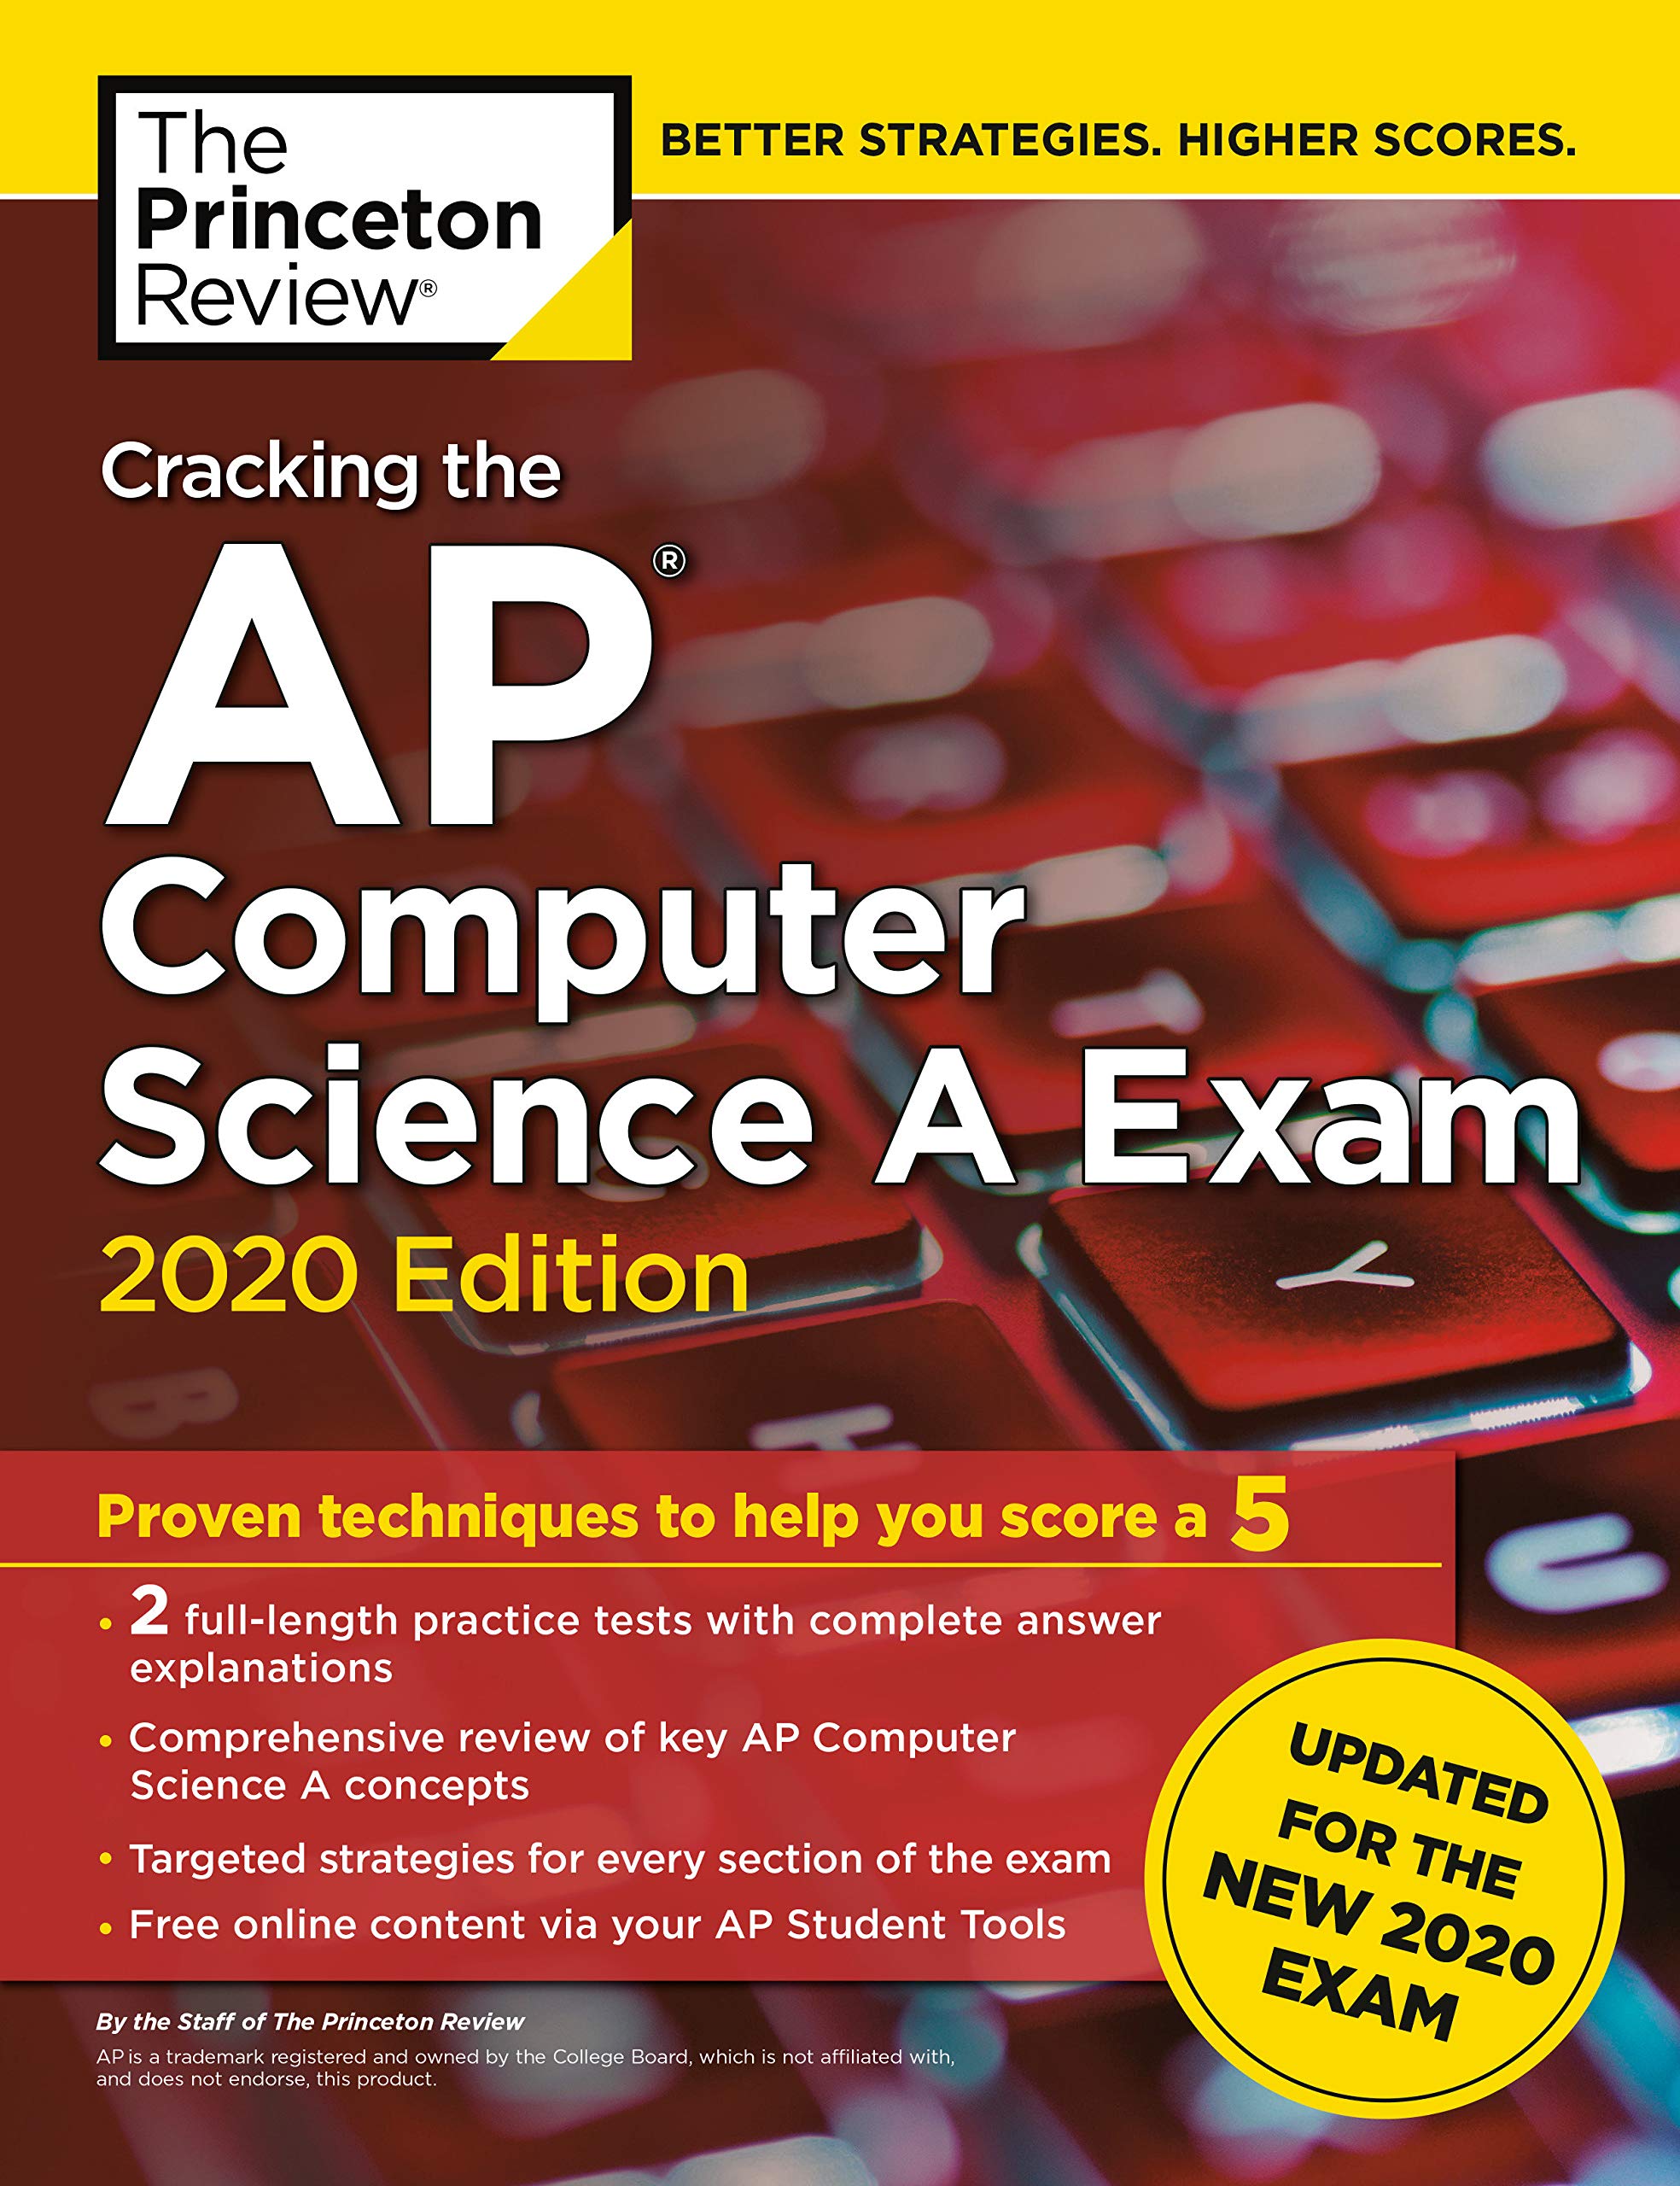 Cracking the AP Computer Science A Exam, 2020 Edition: Practice Tests & Prep for the NEW 2020 Exam (College Test Preparation)